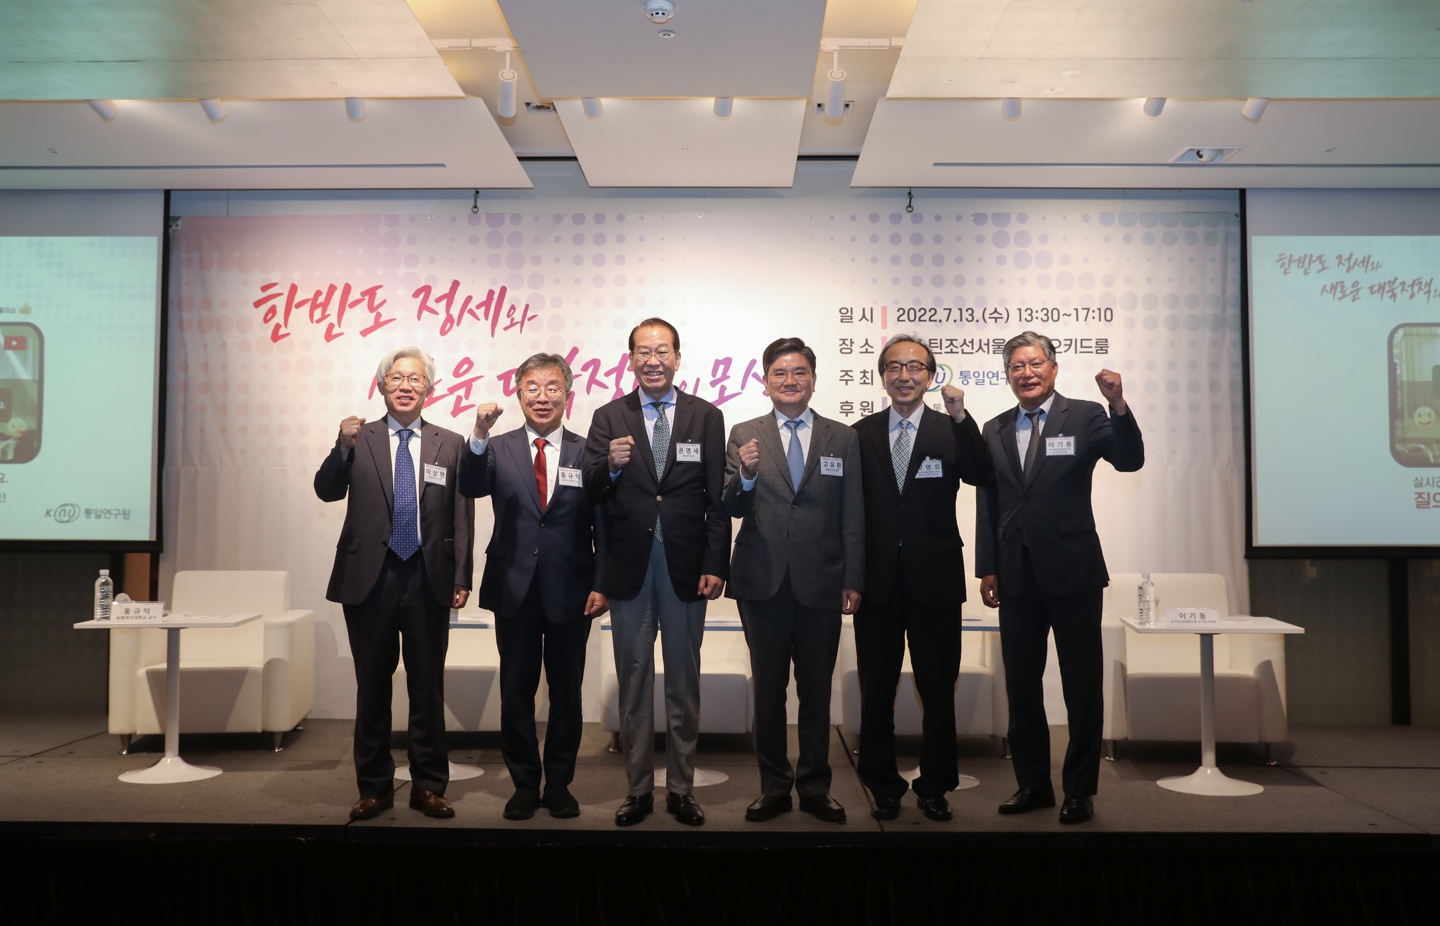 Unification Minister Kwon Youngse Delivers Congratulatory Remarks at Academic Conference